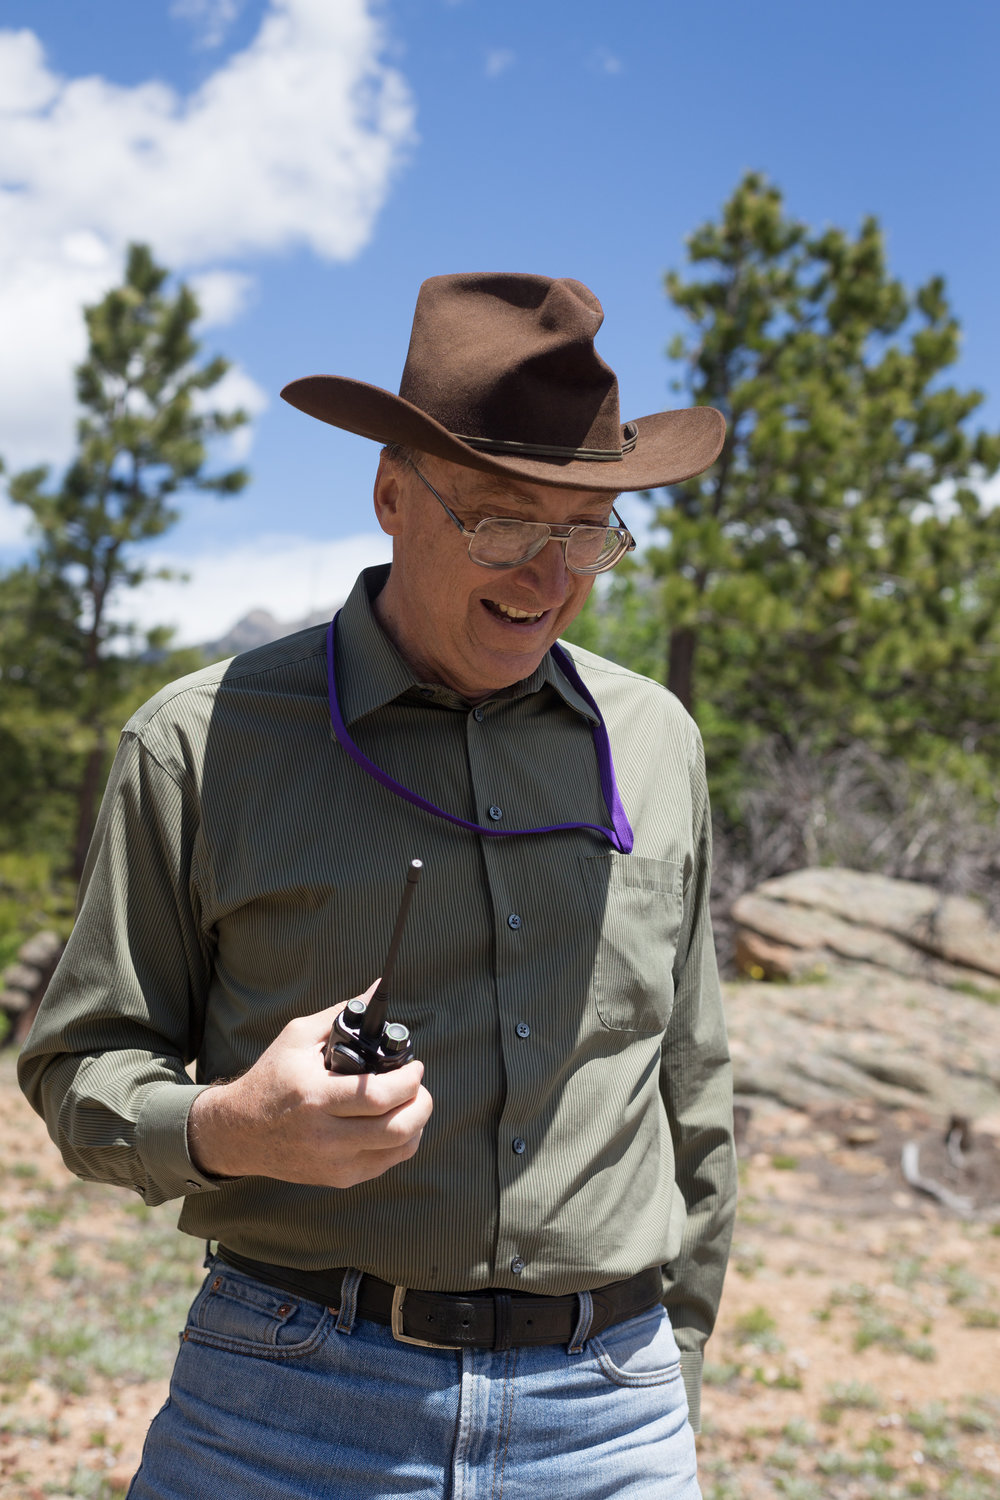 Jim Richard, pictured June 20, 2019, and his wife are full- time volunteer greeters and self-described docents at the Chapel on the Rock, formally named St. Catherine of Siena Chapel in Allenspark, Colorado, near Estes Park. The chapel is on the grounds of the Camp St. Malo Retreat Center, which was made famous during St. John Paul II’s epic World Youth Day visit to the Denver in 1993.